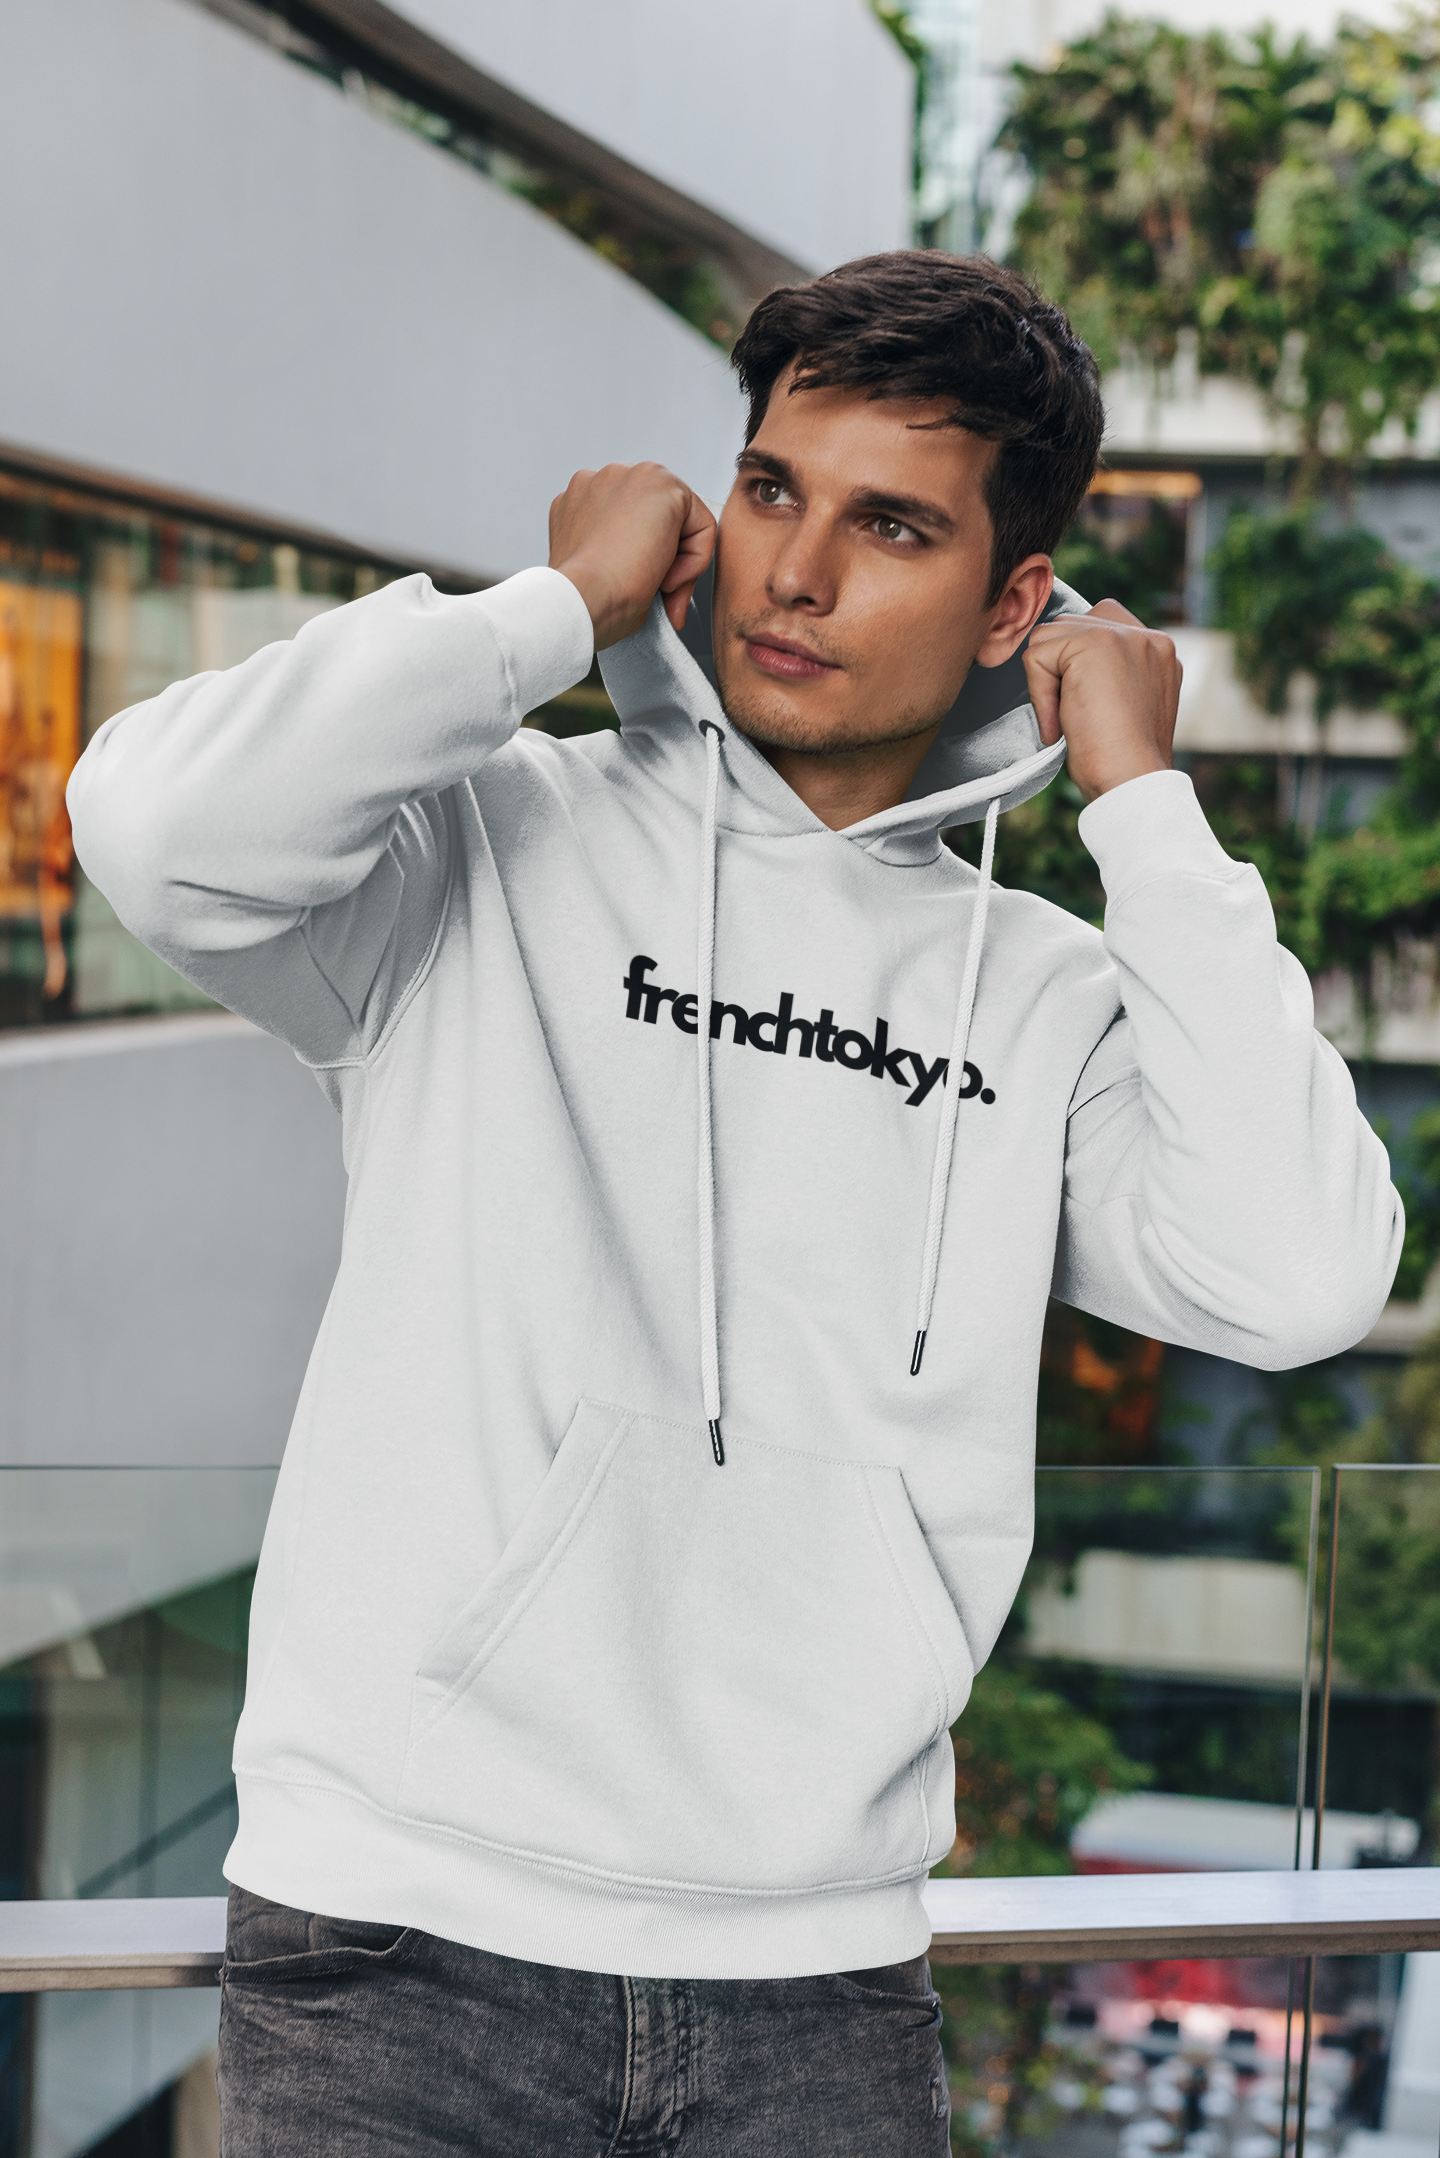 French Tokyo - Hoodie for Both Men and Women | Unisex